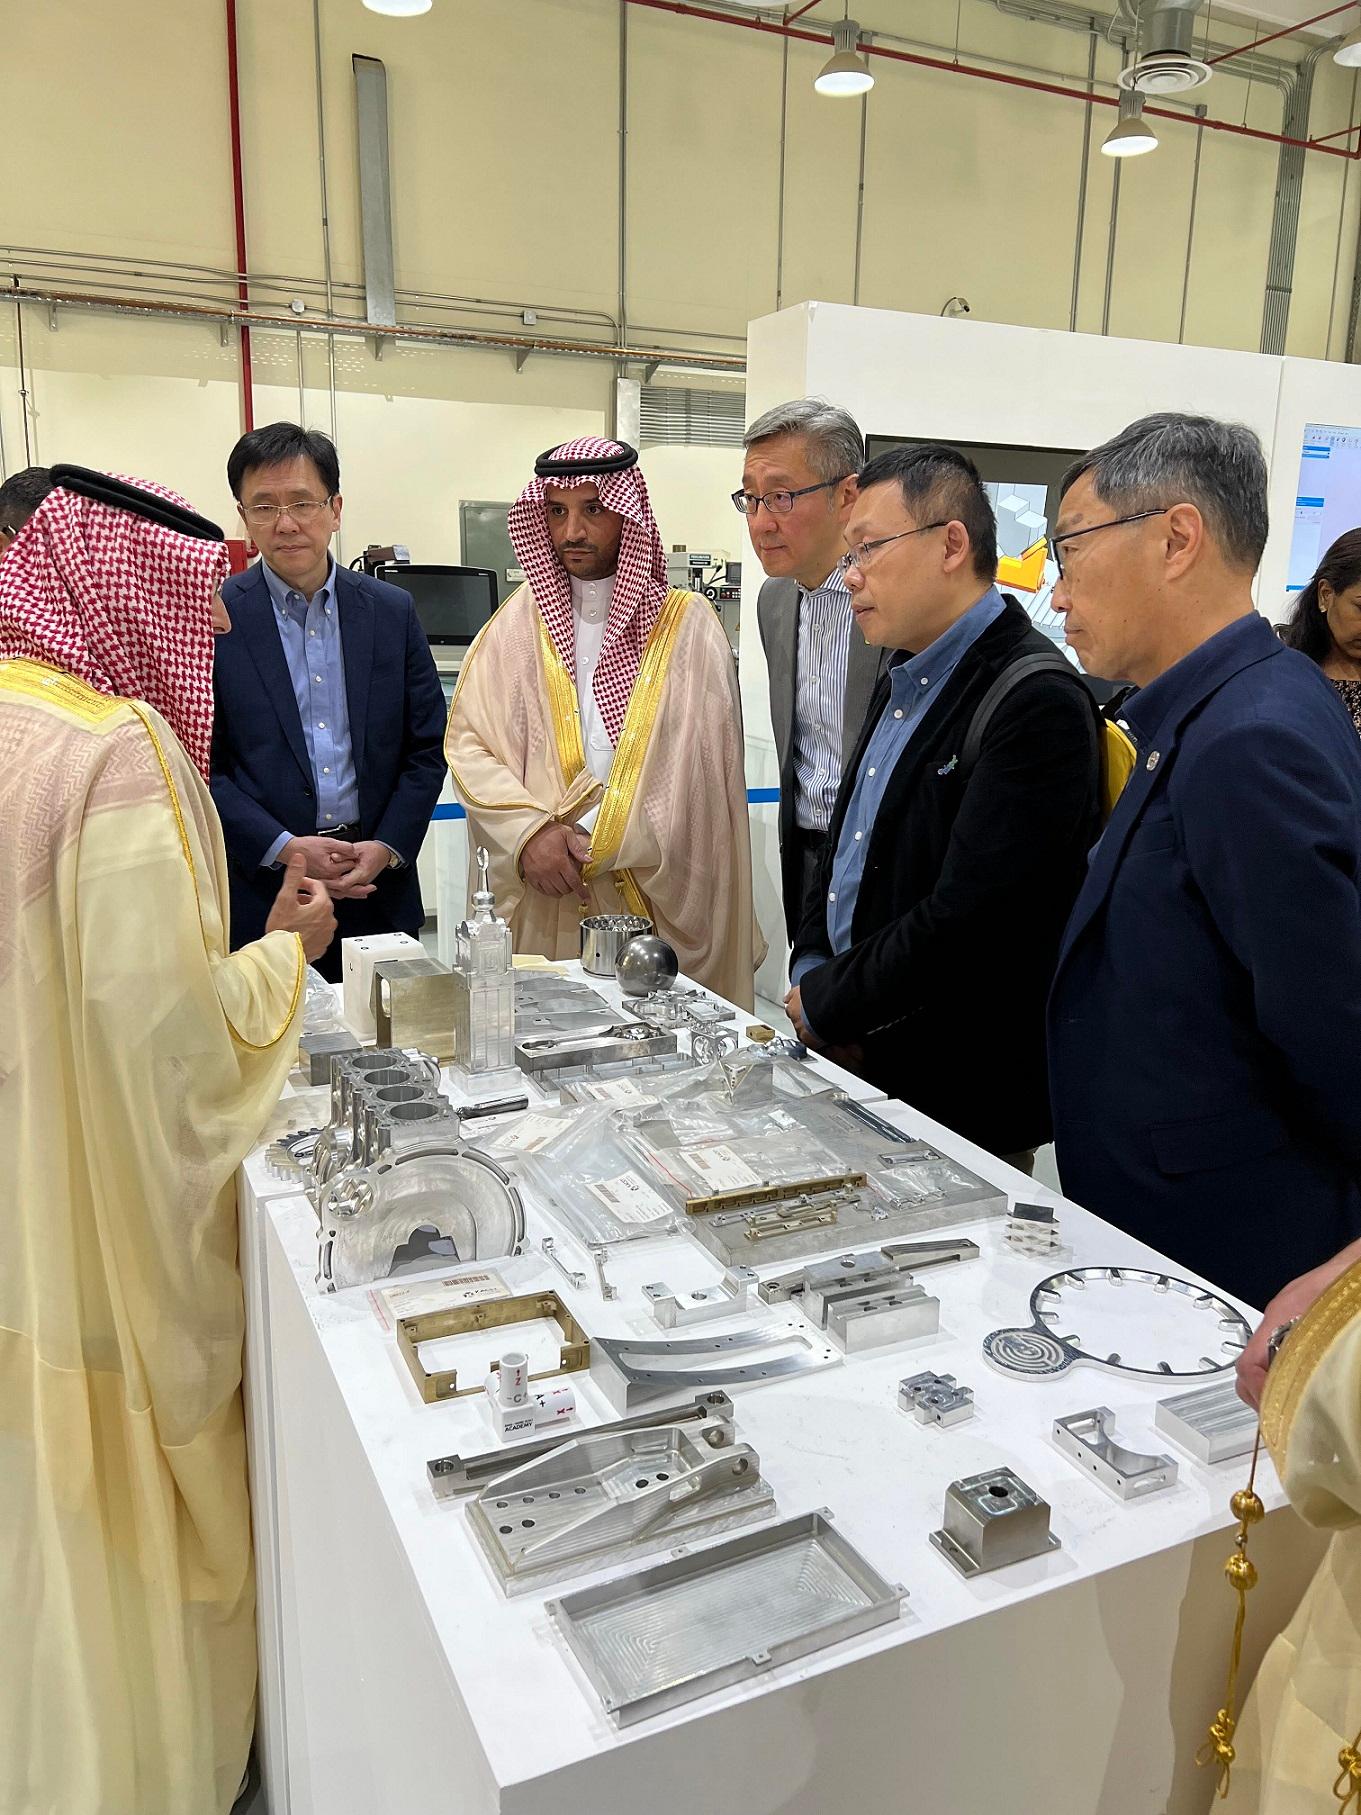 The Secretary for Innovation, Technology and Industry, Professor Sun Dong (second left), visited an innovation centre for promoting advanced manufacturing in King Abdulaziz City for Science and Technology on March 3 (Riyadh time). Looking on are the Chief Executive Officer of the Hong Kong Science and Technology Parks
Corporation, Mr Albert Wong (first right); and the Chief Executive Officer of the Hong Kong Cyberport Management Company Limited, Mr Peter Yan (third right).